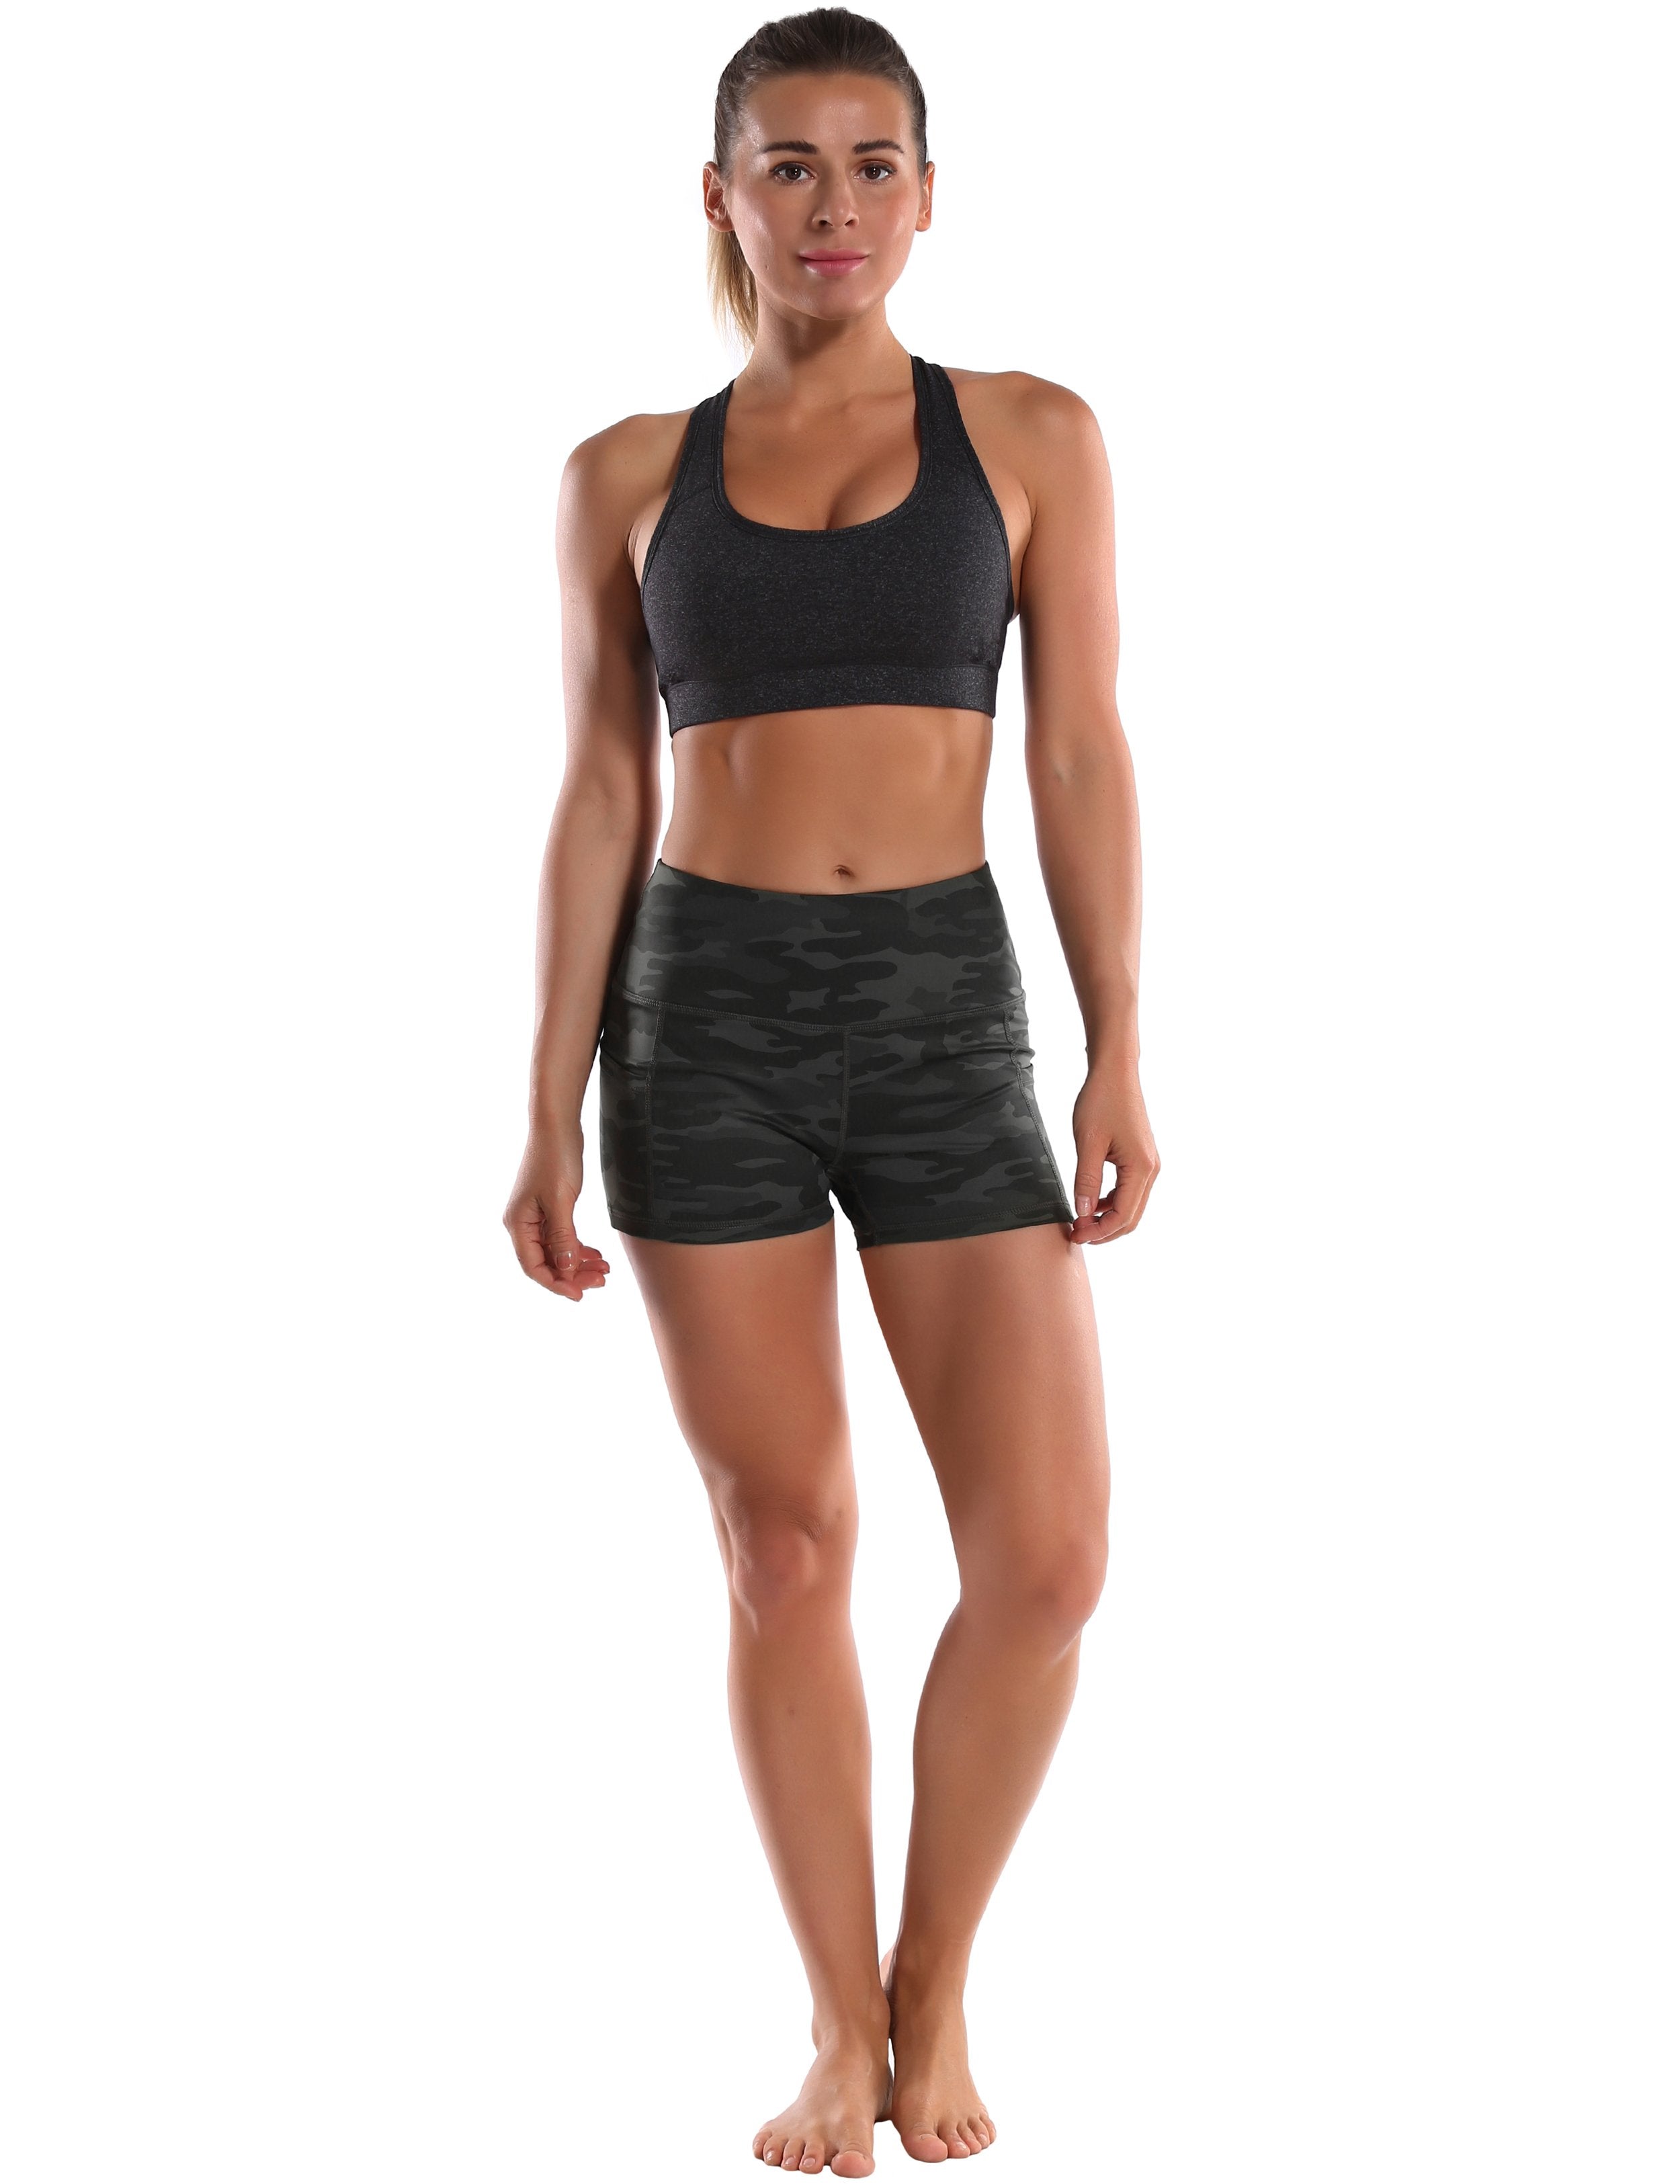 2.5" Printed Side Pockets Tall Size Shorts dimgraycamo Sleek, soft, smooth and totally comfortable: our newest sexy style is here. Softest-ever fabric High elasticity High density 4-way stretch Fabric doesn't attract lint easily No see-through Moisture-wicking Machine wash 78% Polyester, 22% Spandex